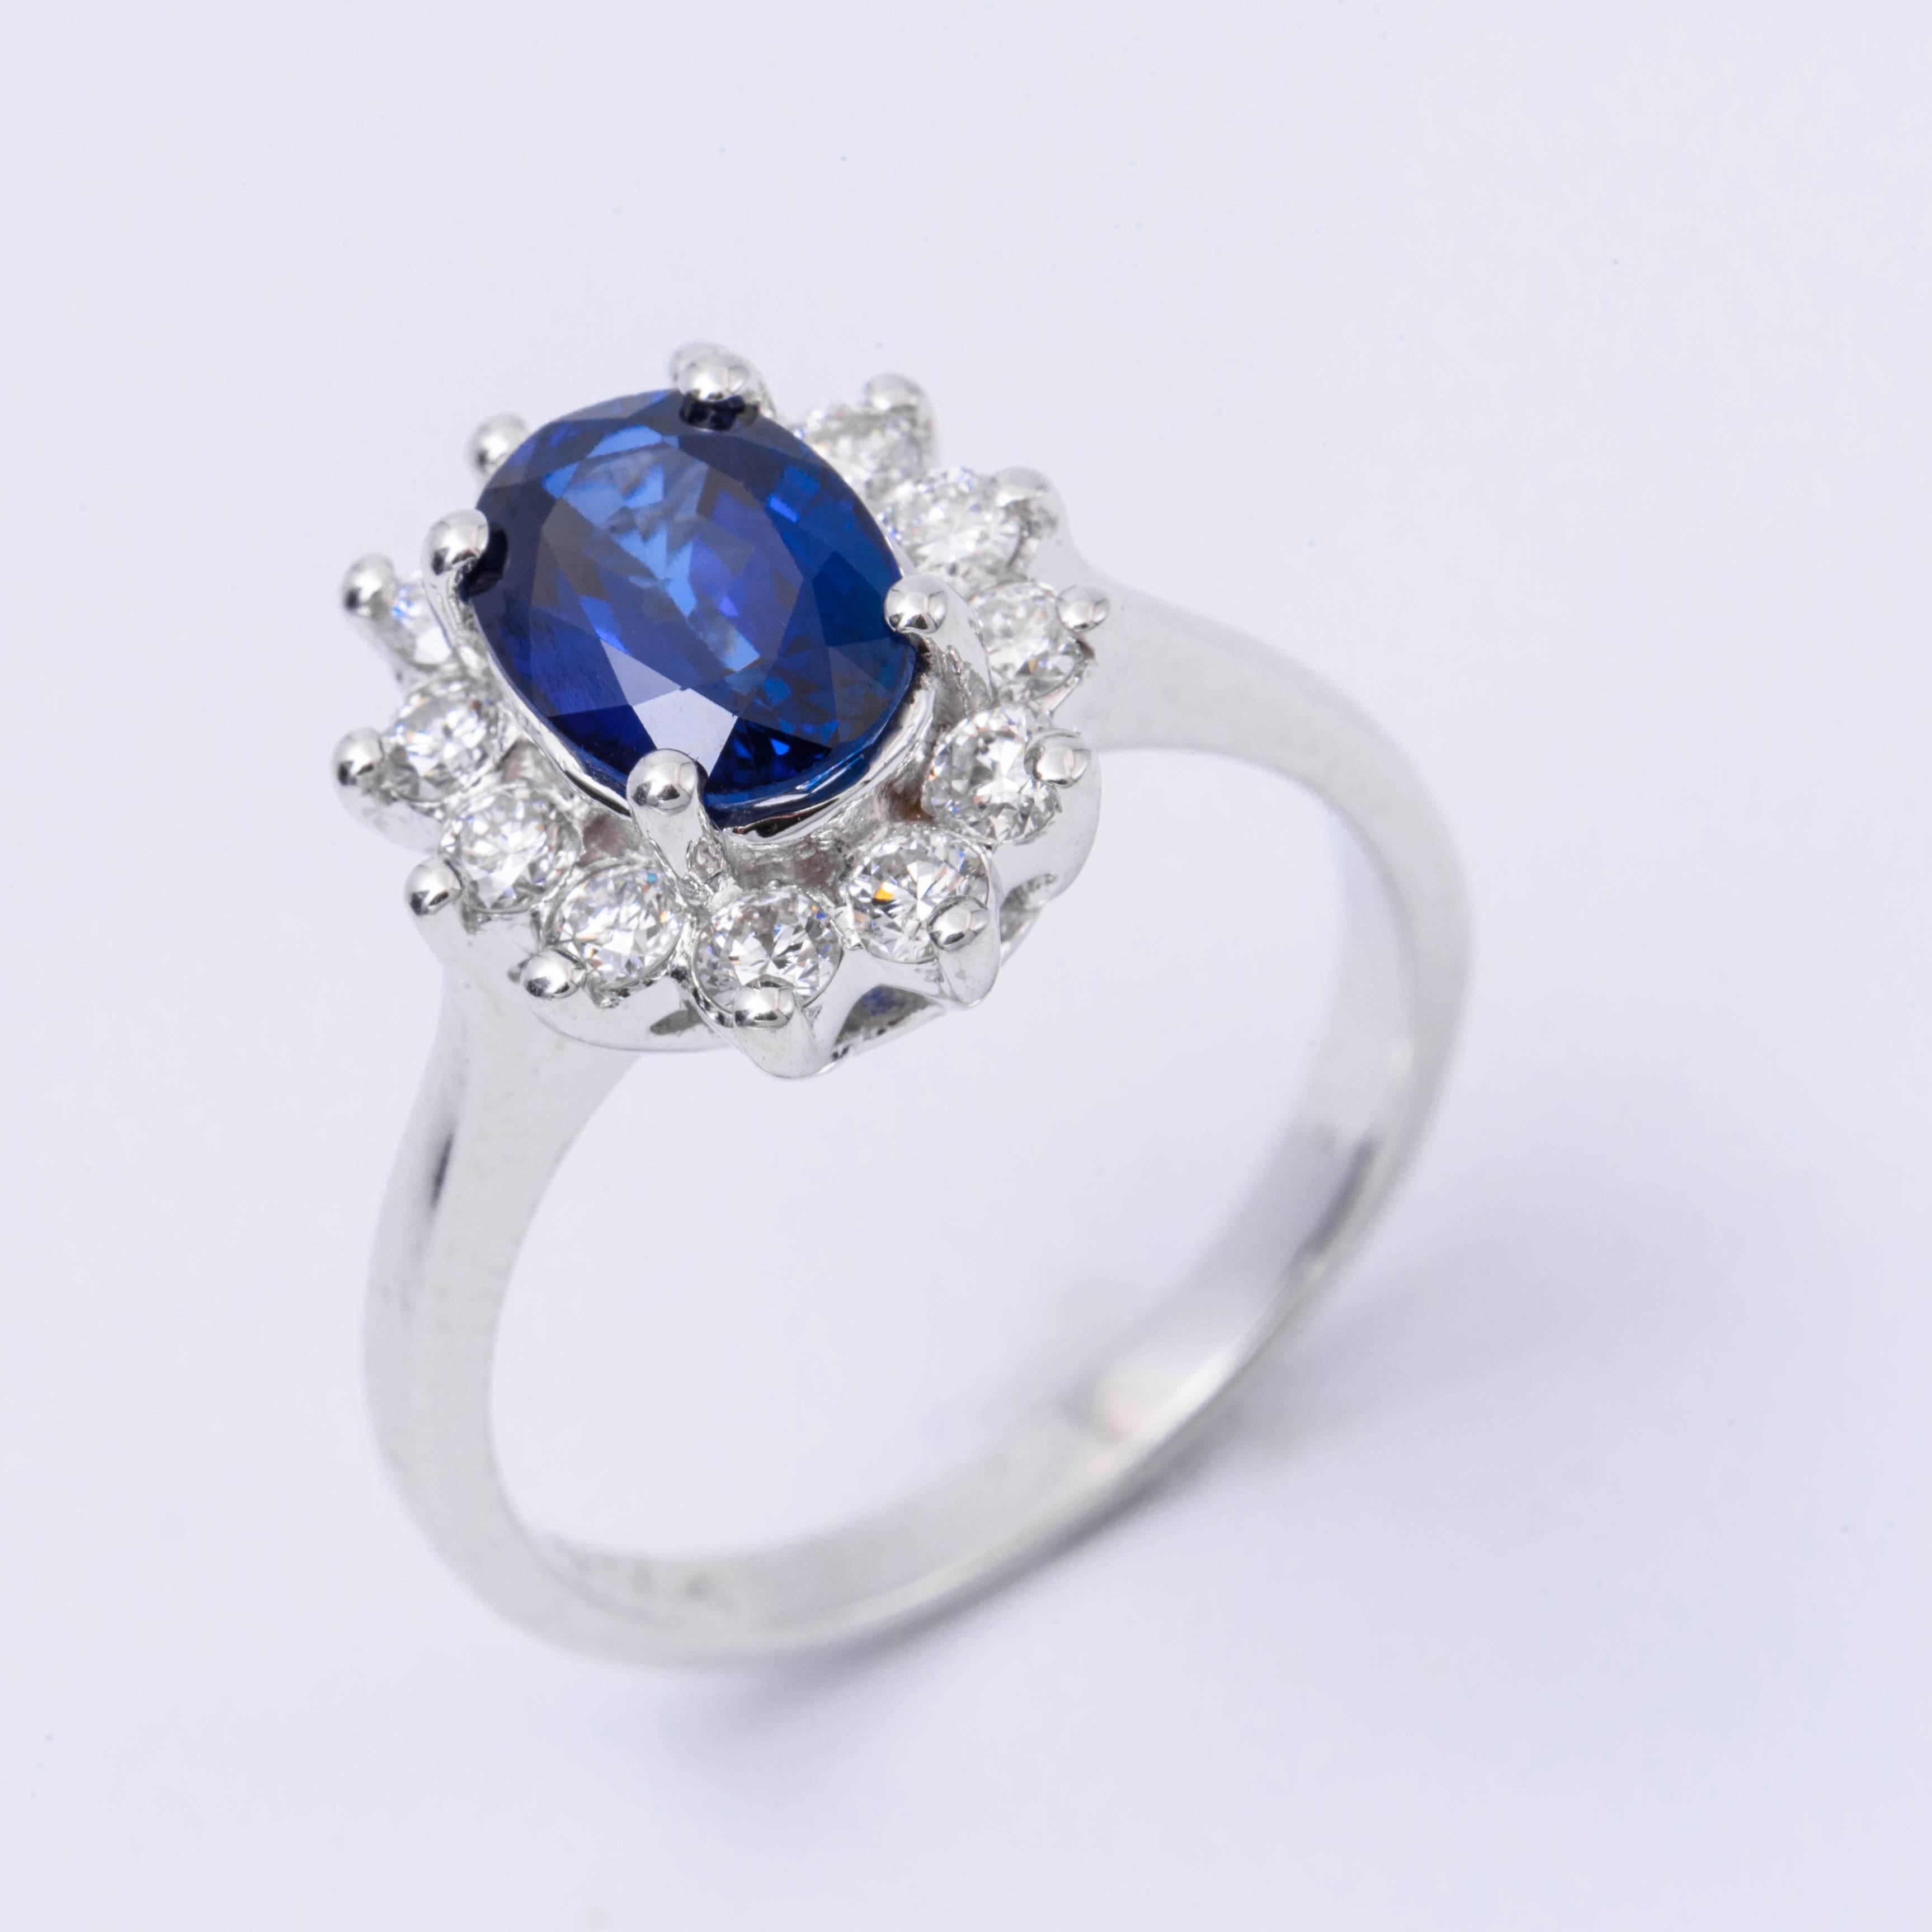 Contemporary Oval Sapphire and Diamond Engagement Ring 1.79 Carat